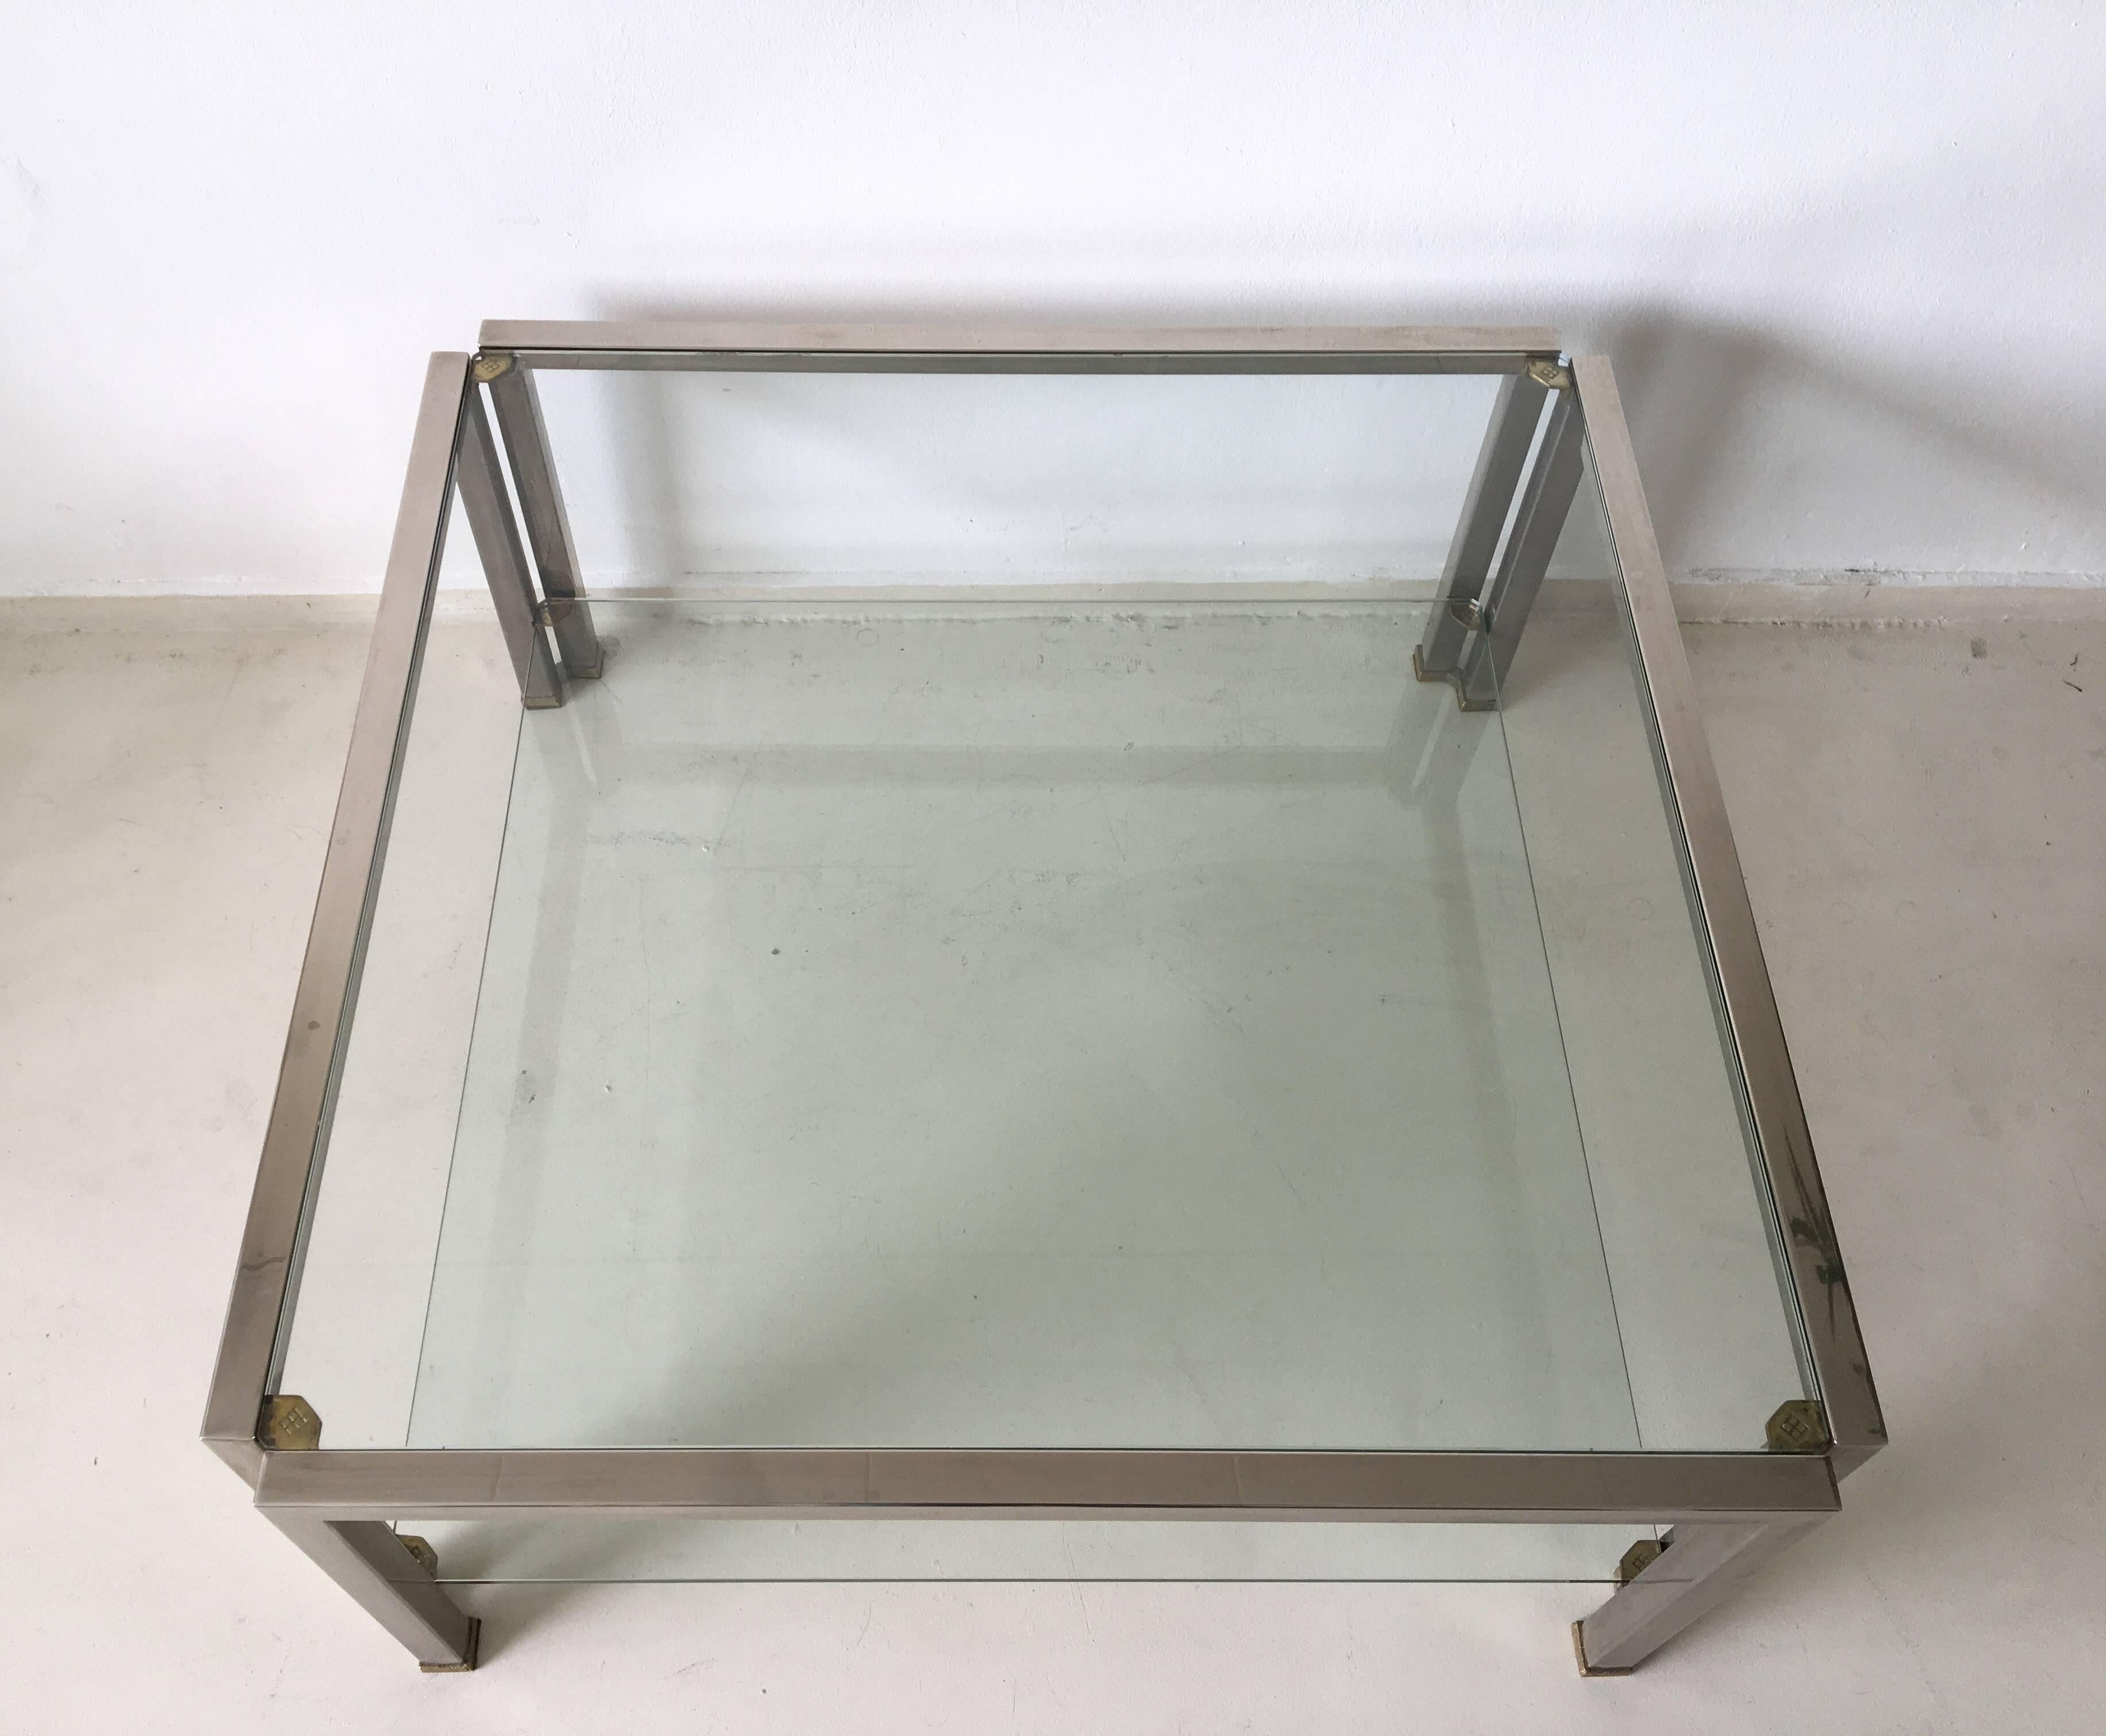 This glass coffee table with two shelves, was designed and manufactured by Peter Ghyczy in the Netherlands in 1986. It's frame is fabricated in 3x3 cm stainless steel square tubing fastened together with with brass and ribbed fittings. The glass top